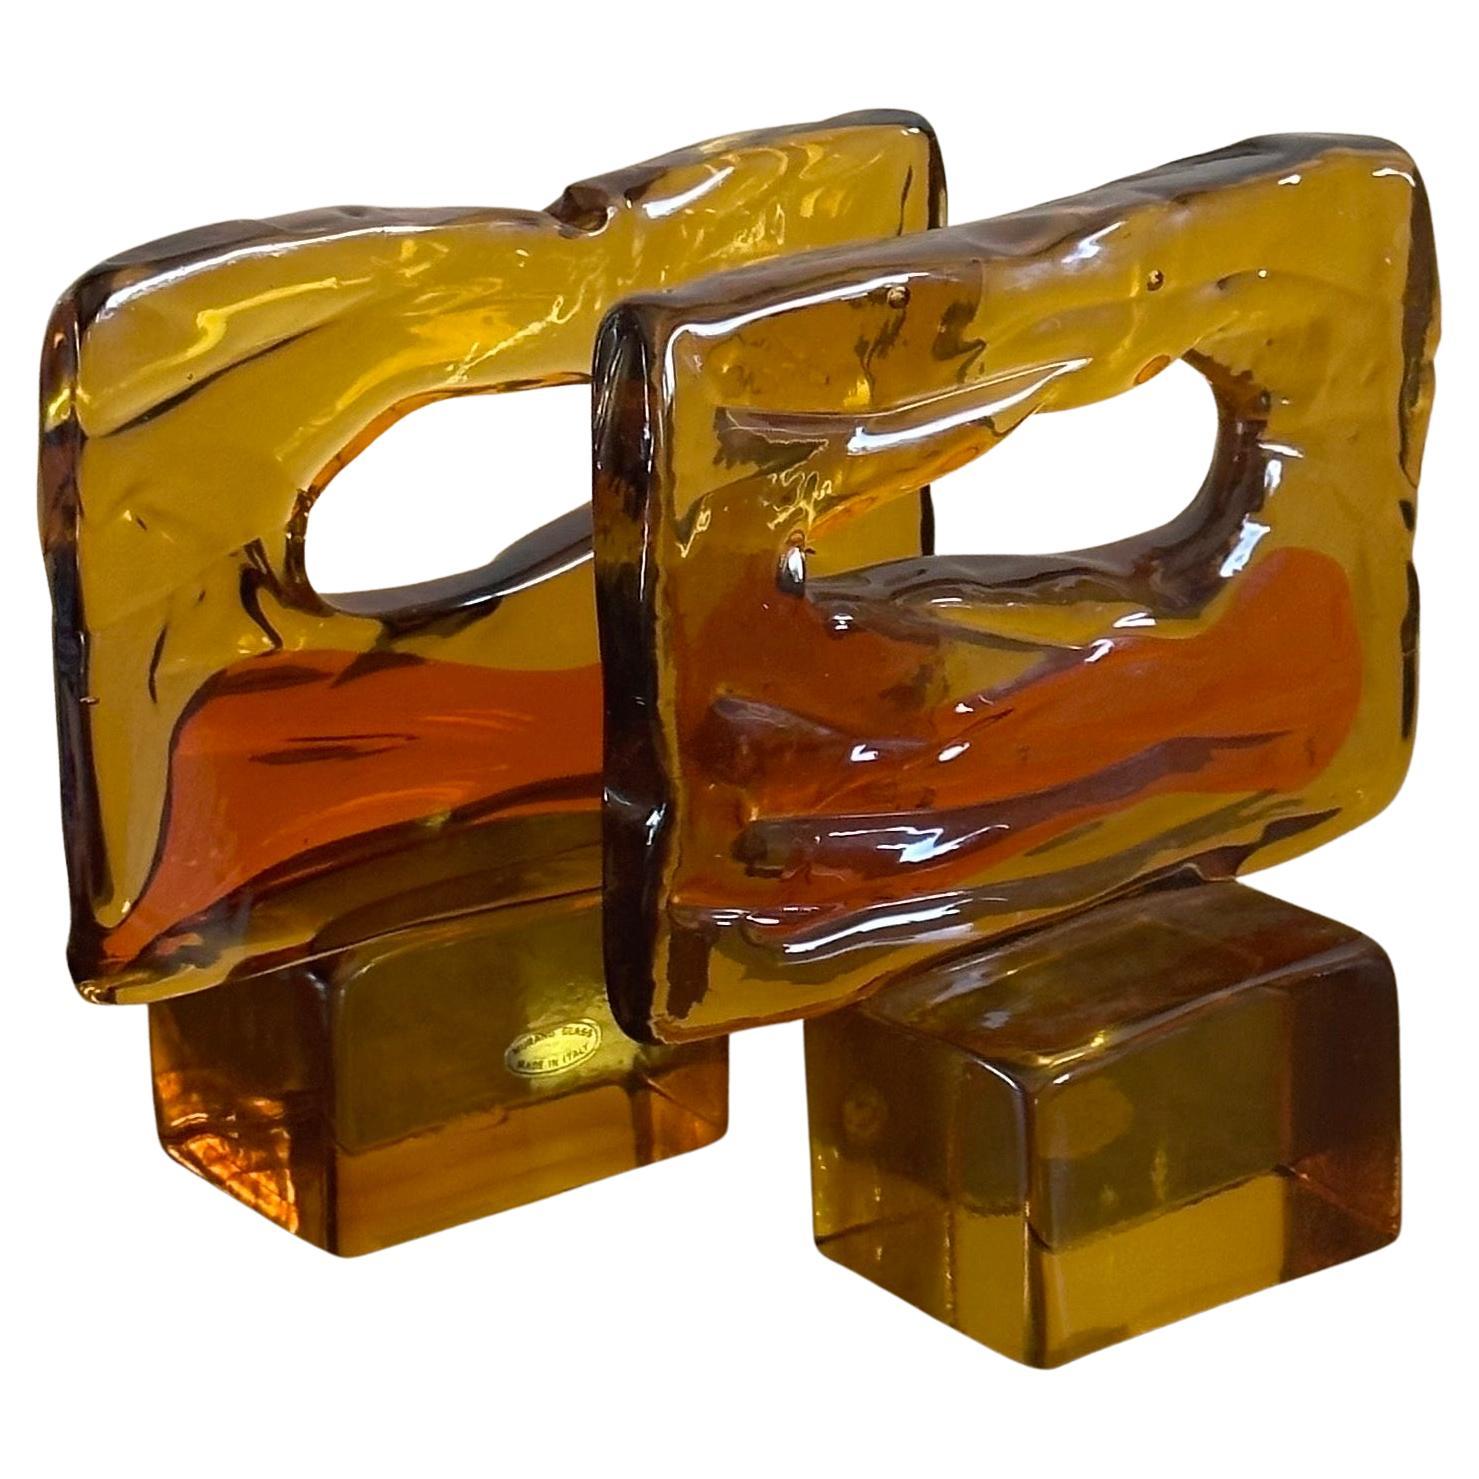 Gorgeous pair of large abstract sommerso bookends by Luciano Gaspari for Murano Glass, circa 1960's.  The pair are in very good vintage condition with no chips or cracks  and measure 6